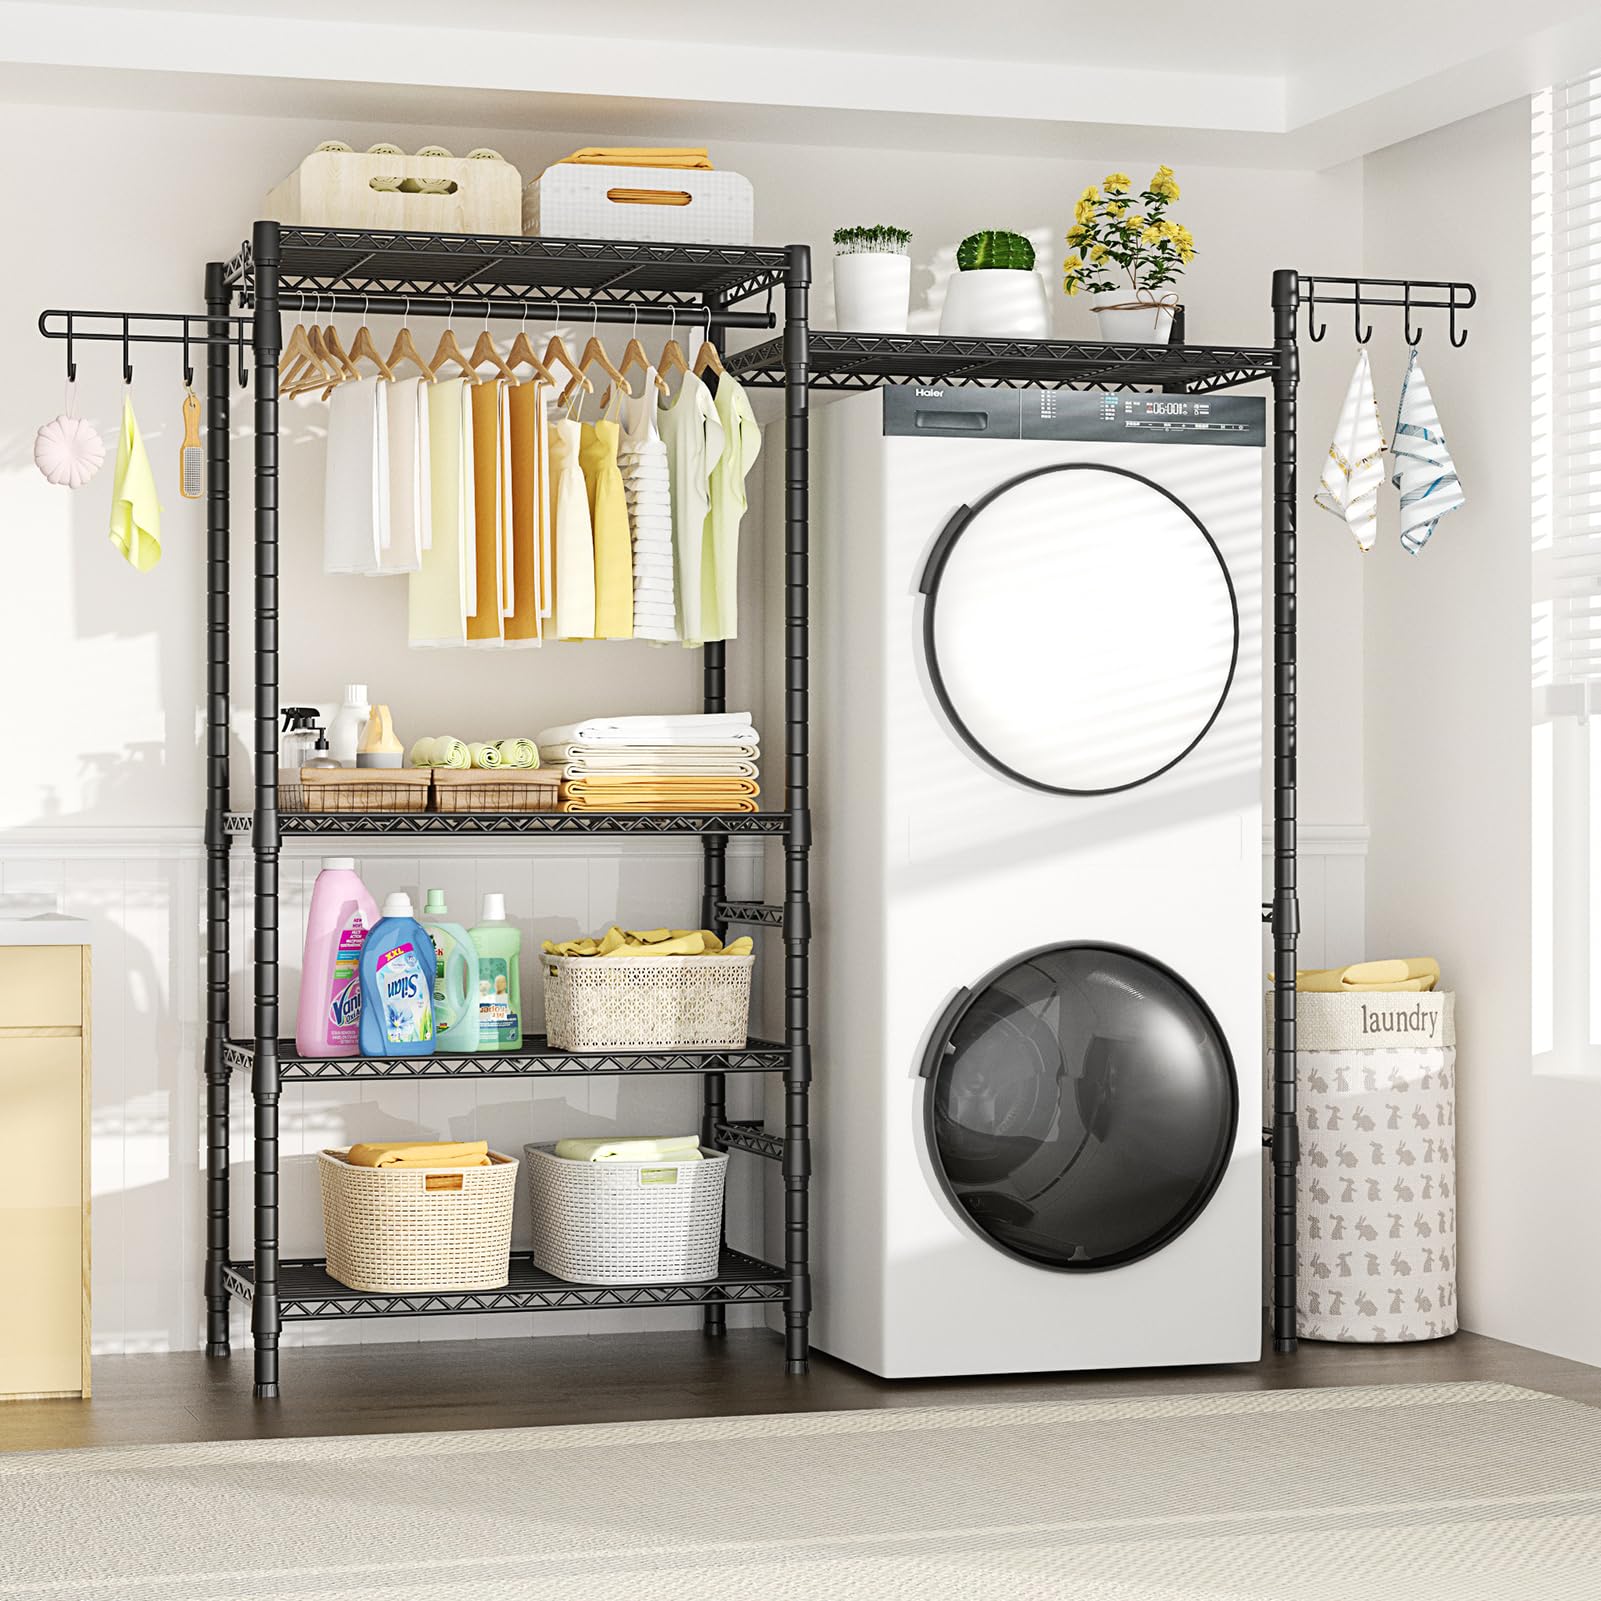 Ulif U5 Over the Washer and Dryer Storage Shelf, Laundry Room Space Saver Bathroom Storage and Organizer Rack for Hanging Towels and Drying Clothes with 5 Wire Shelves, 58.2"W x 13.4"D x 77.5"H, Black